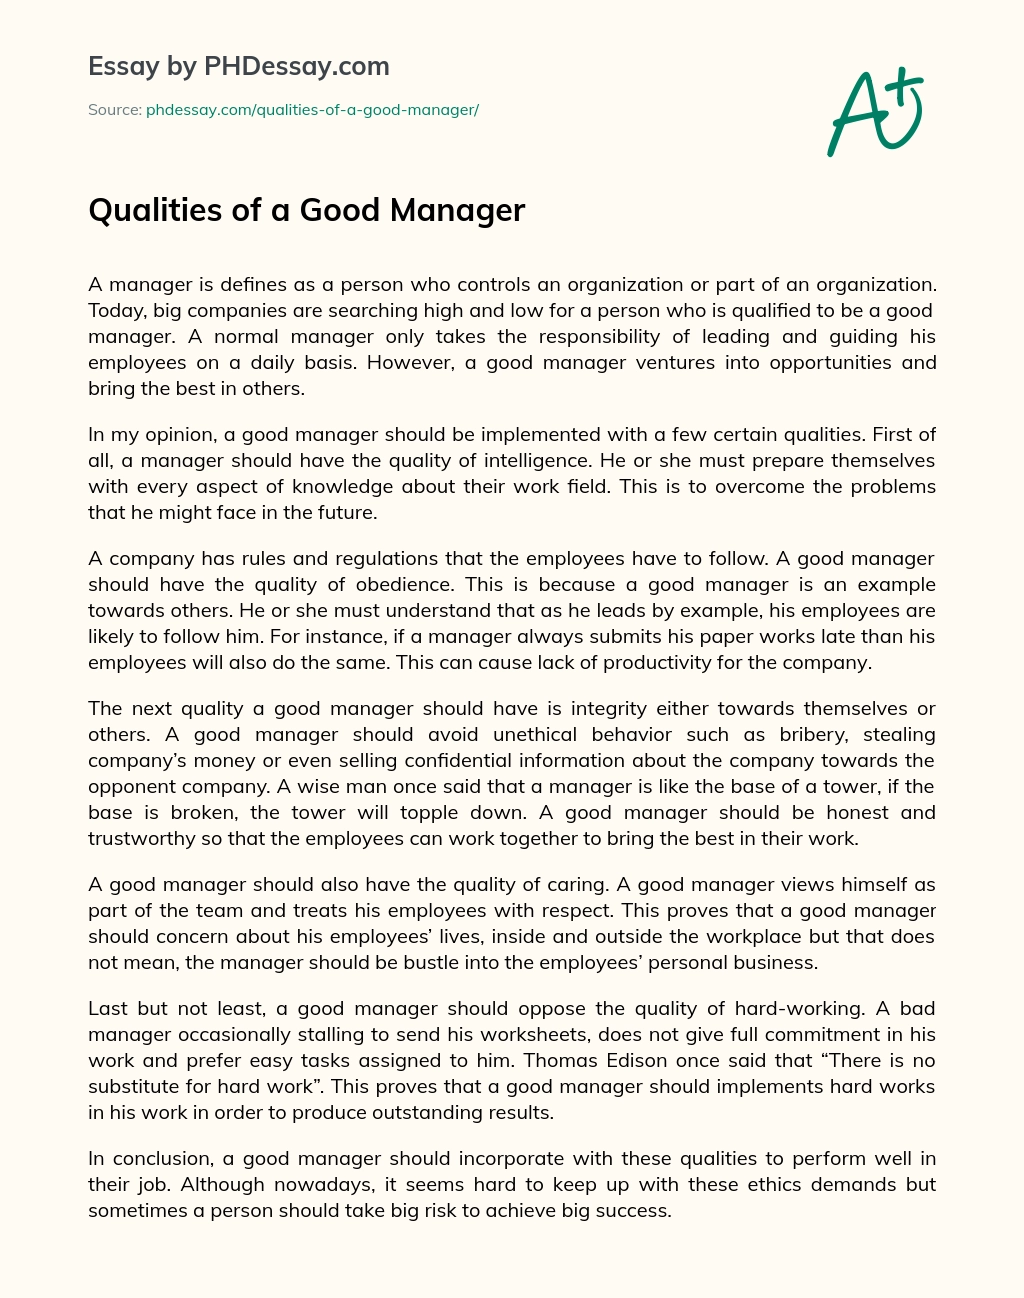 Qualities of a Good Manager essay